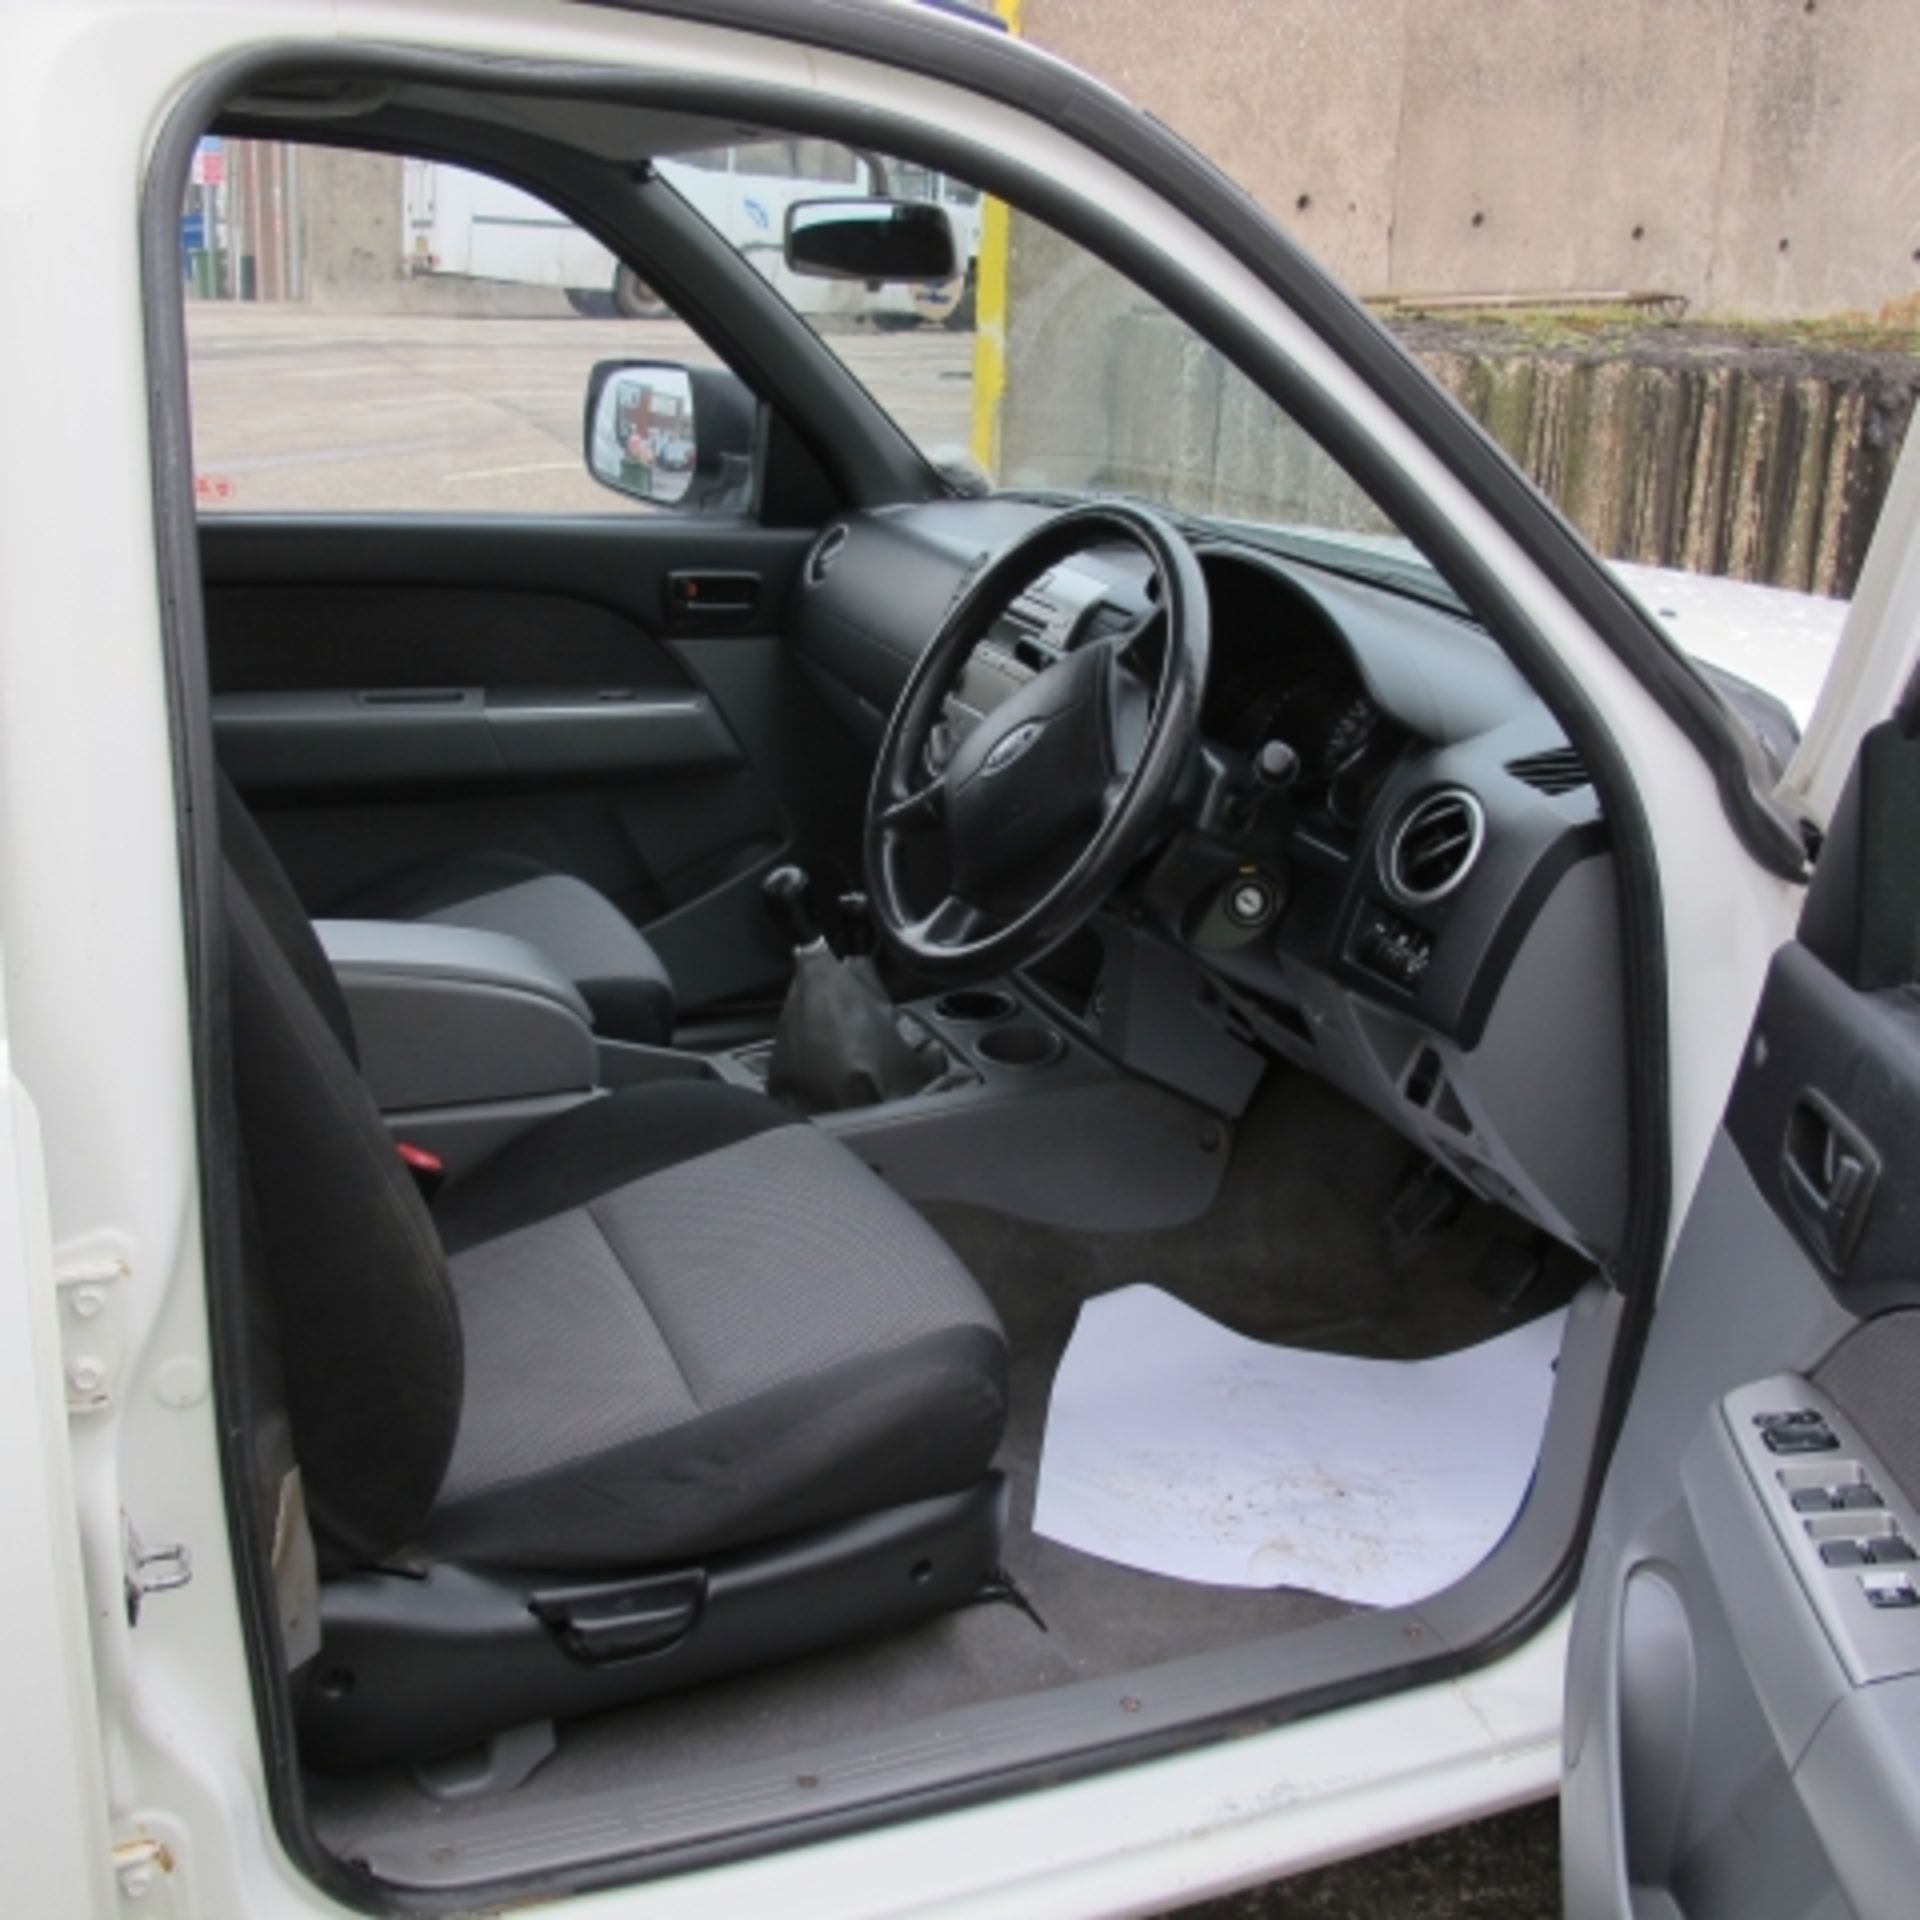 * Ford Ranger 2.5TDCI 4WD Crew Cab Pick up with Rear Sheet Cover & Ball/Pin Hitch, Reg YX07 WDP - Image 7 of 8